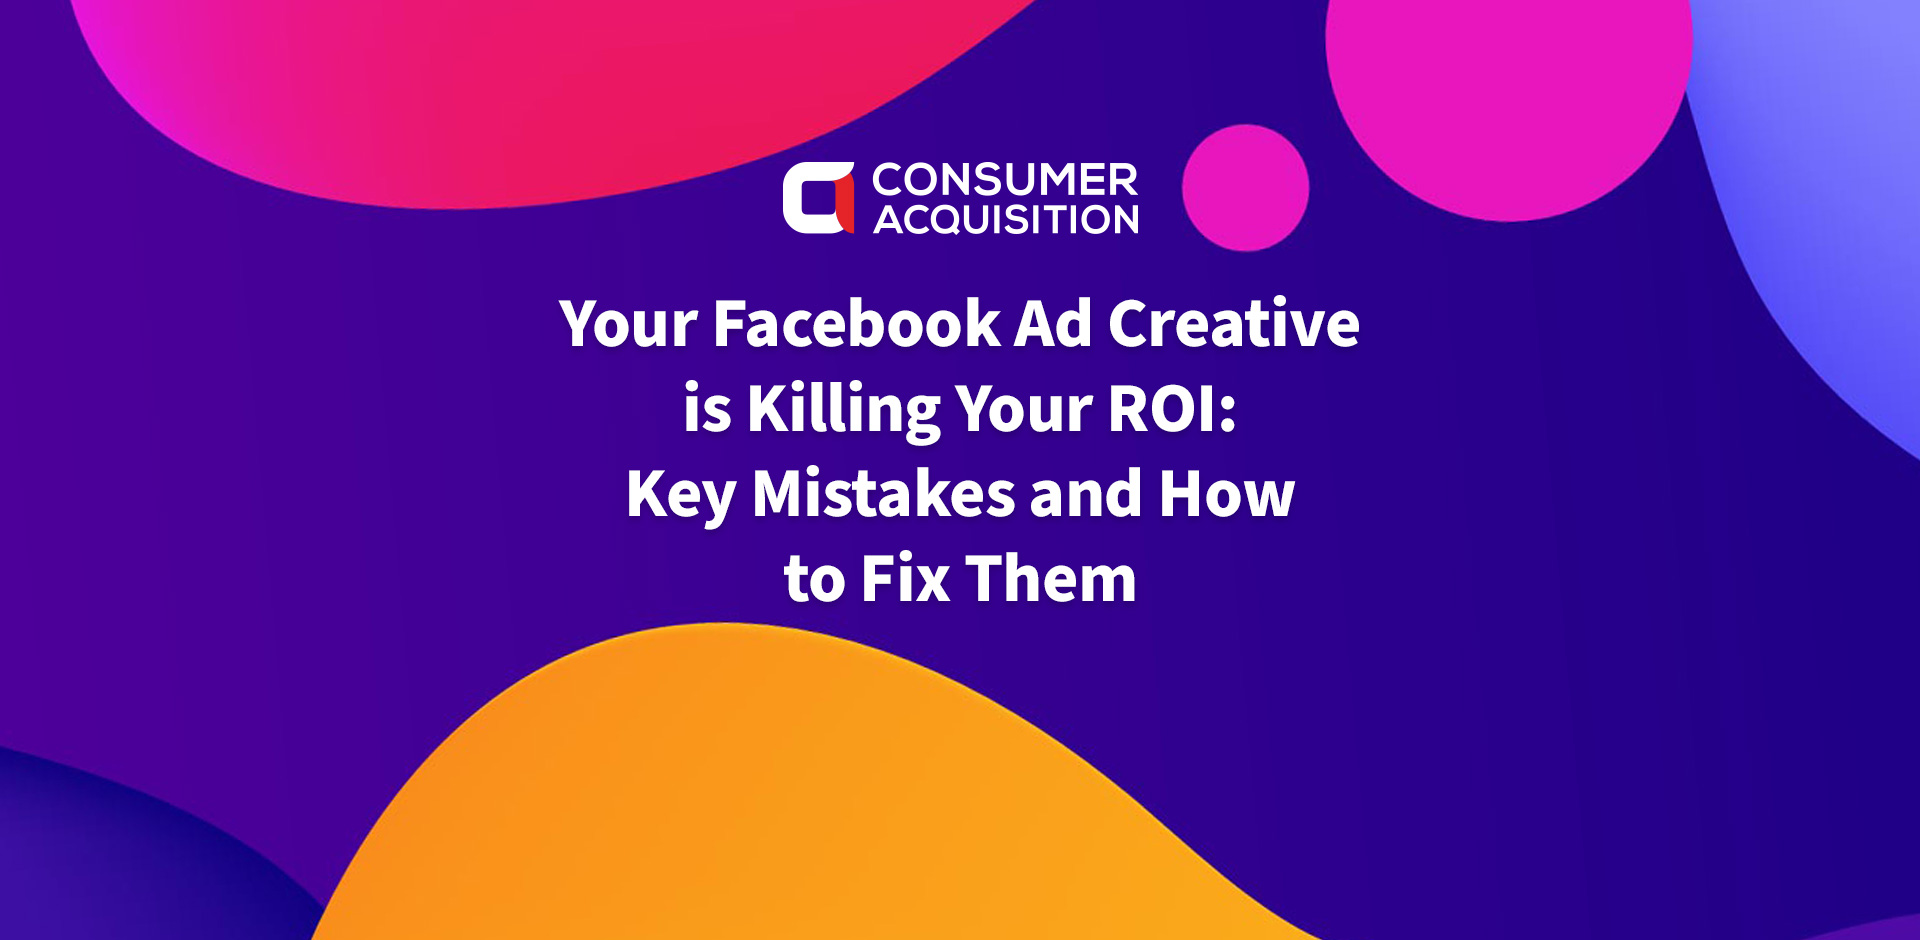 Your Facebook Ad Creative is Killing Your ROI: Key Mistakes and How to Fix Them